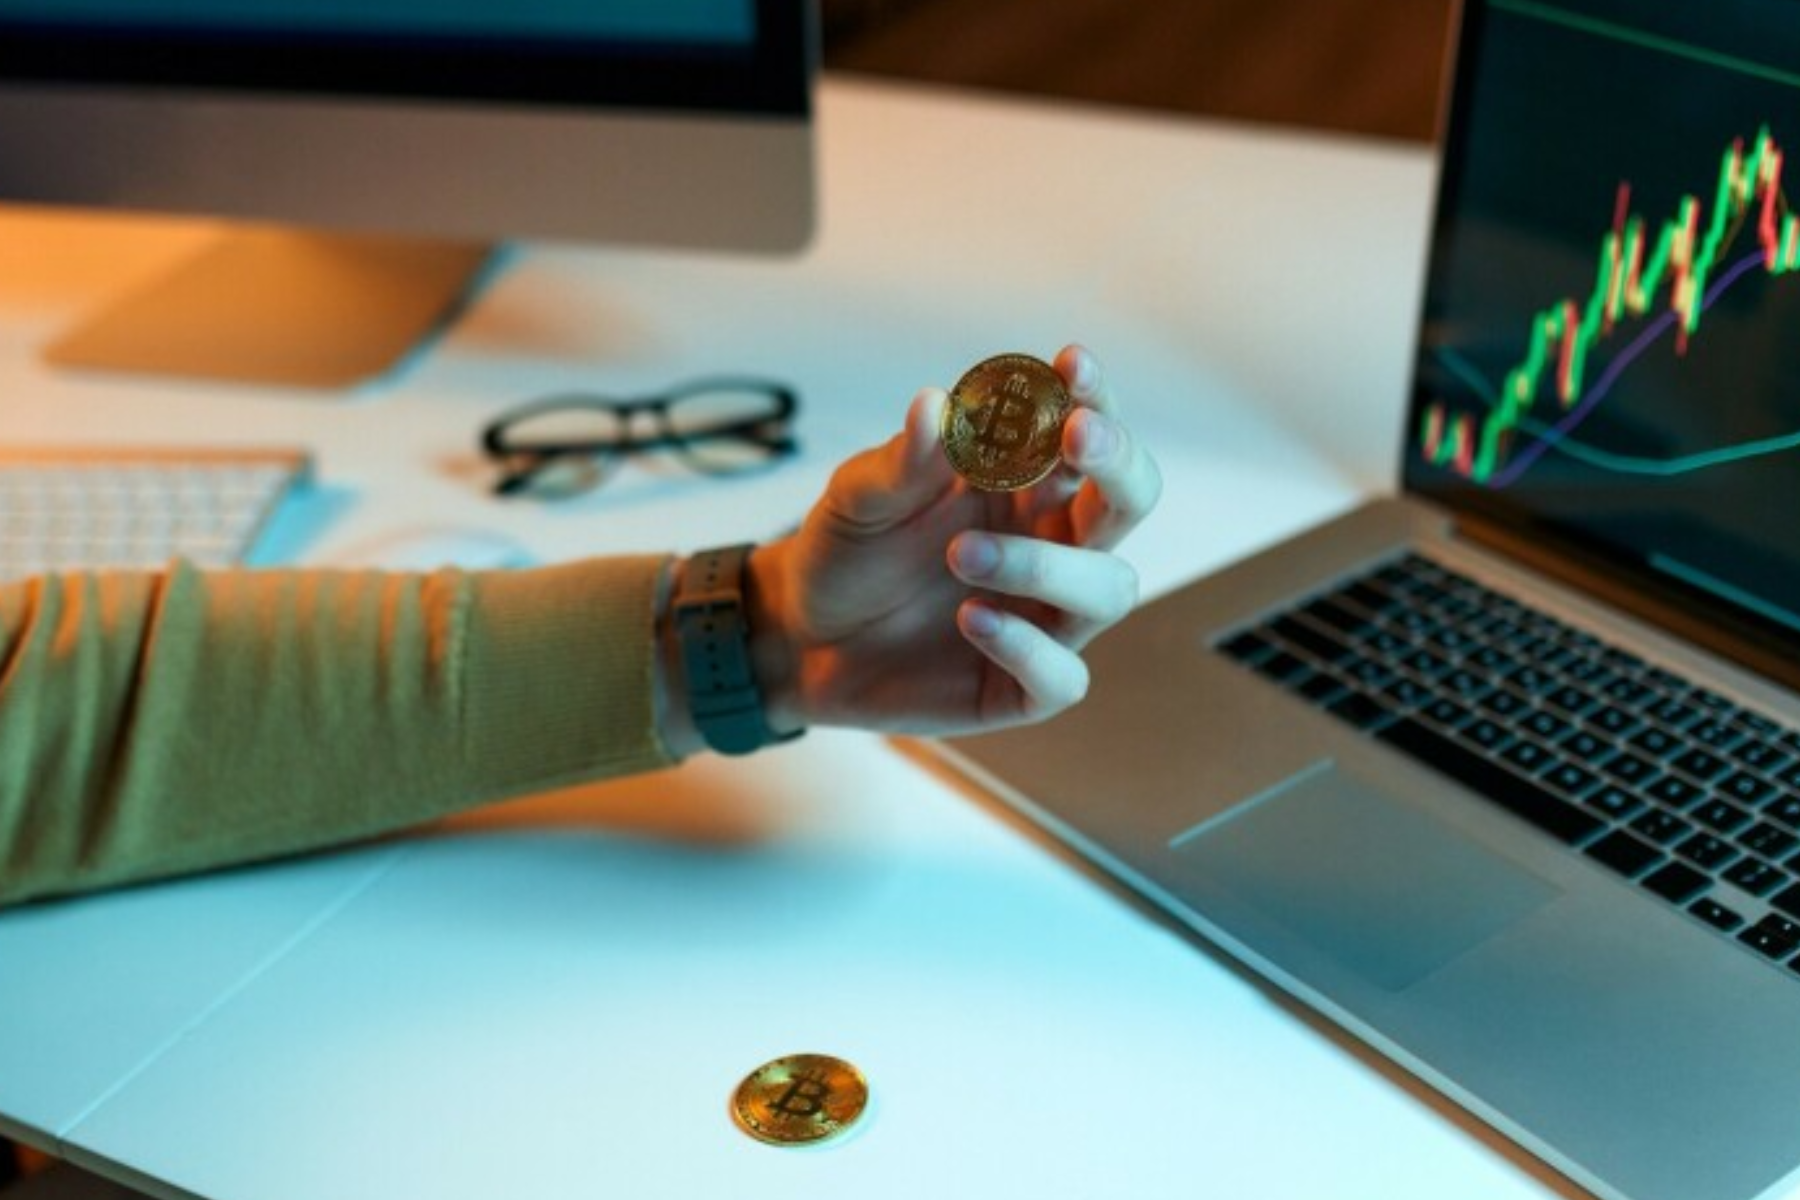 A Bitcoin is held by a hand in front of a laptop